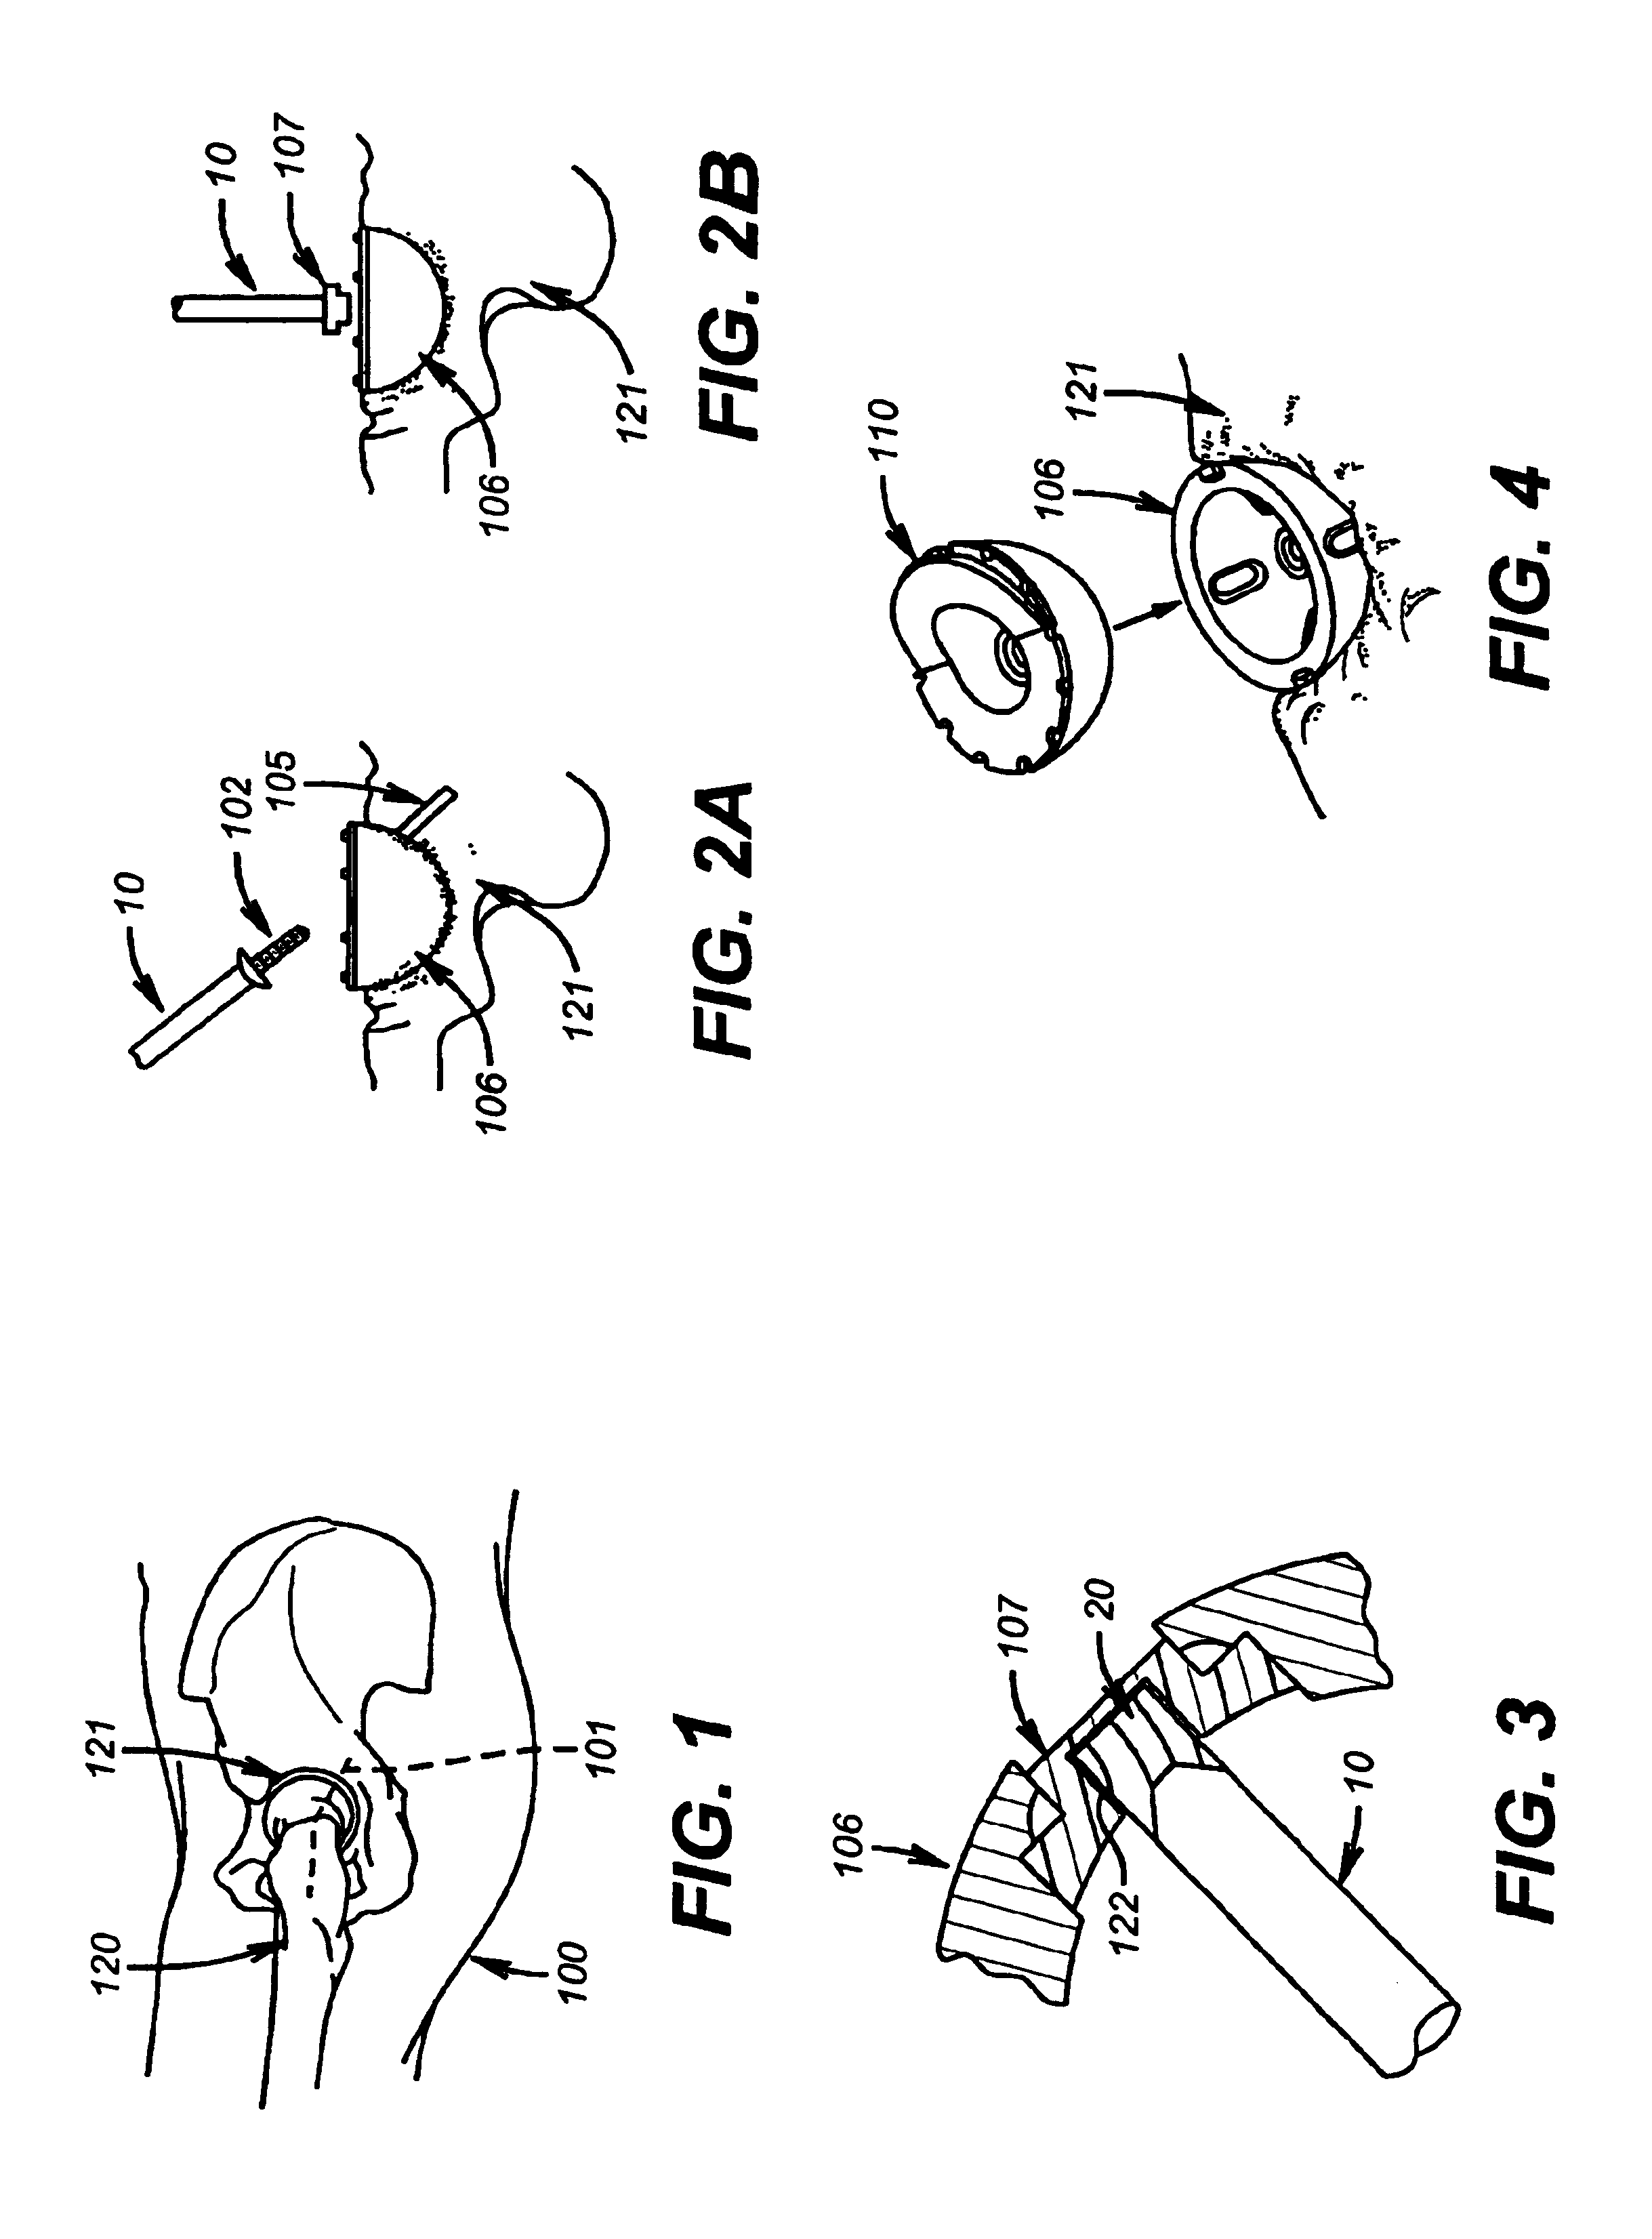 Elongated driving bit attachable to a driving instrument and method of use for minimally invasive hip surgery